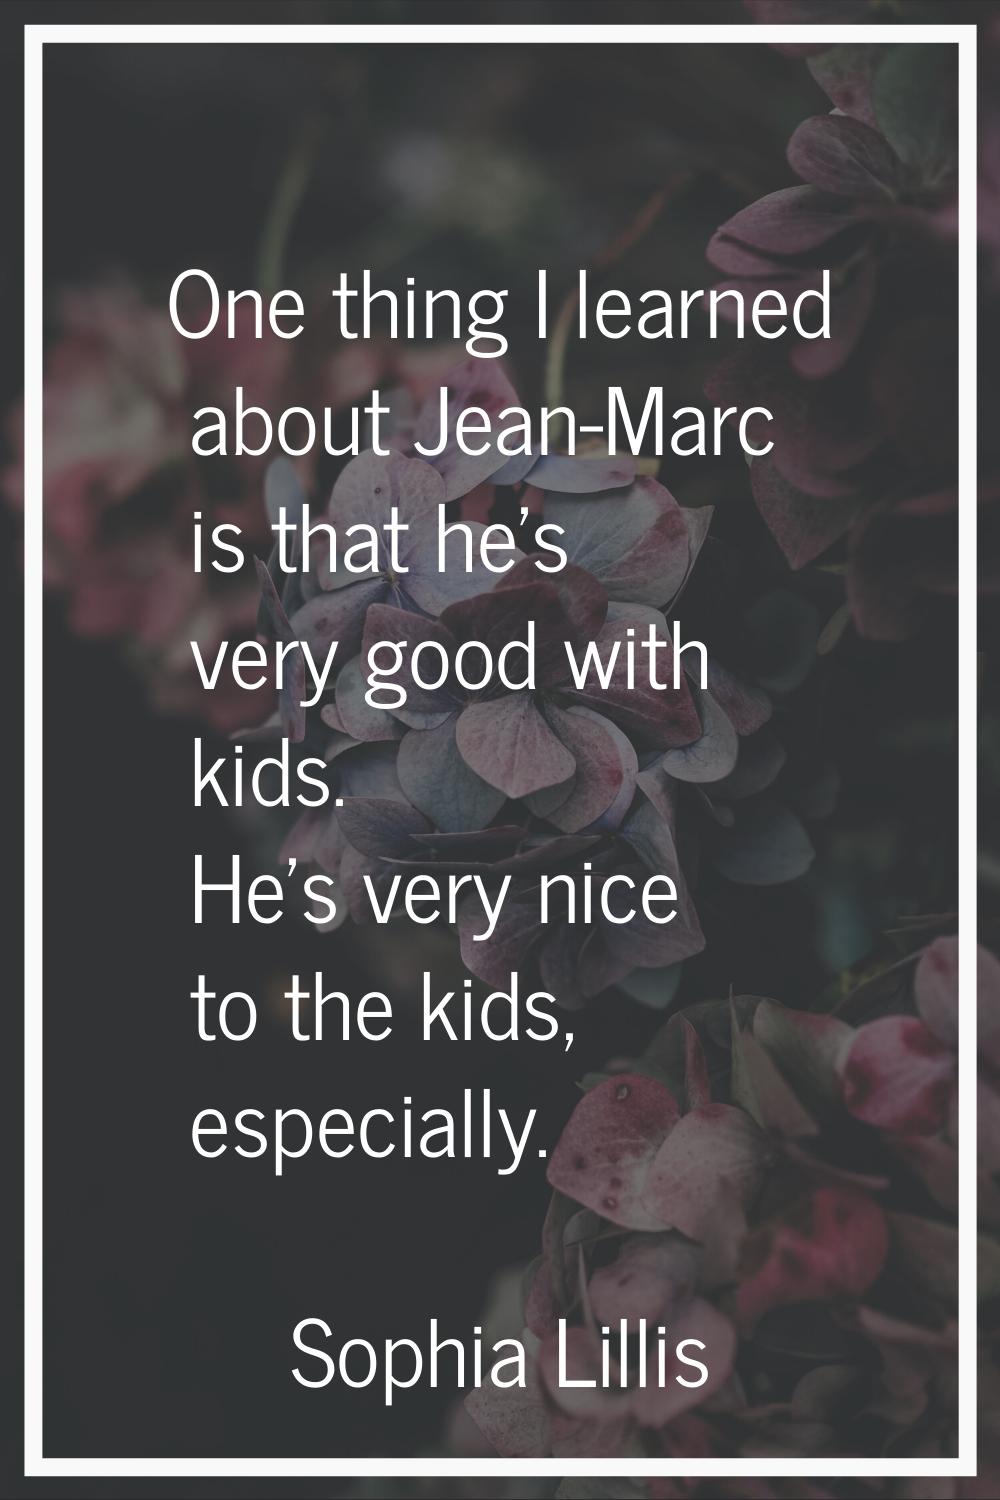 One thing I learned about Jean-Marc is that he's very good with kids. He's very nice to the kids, e